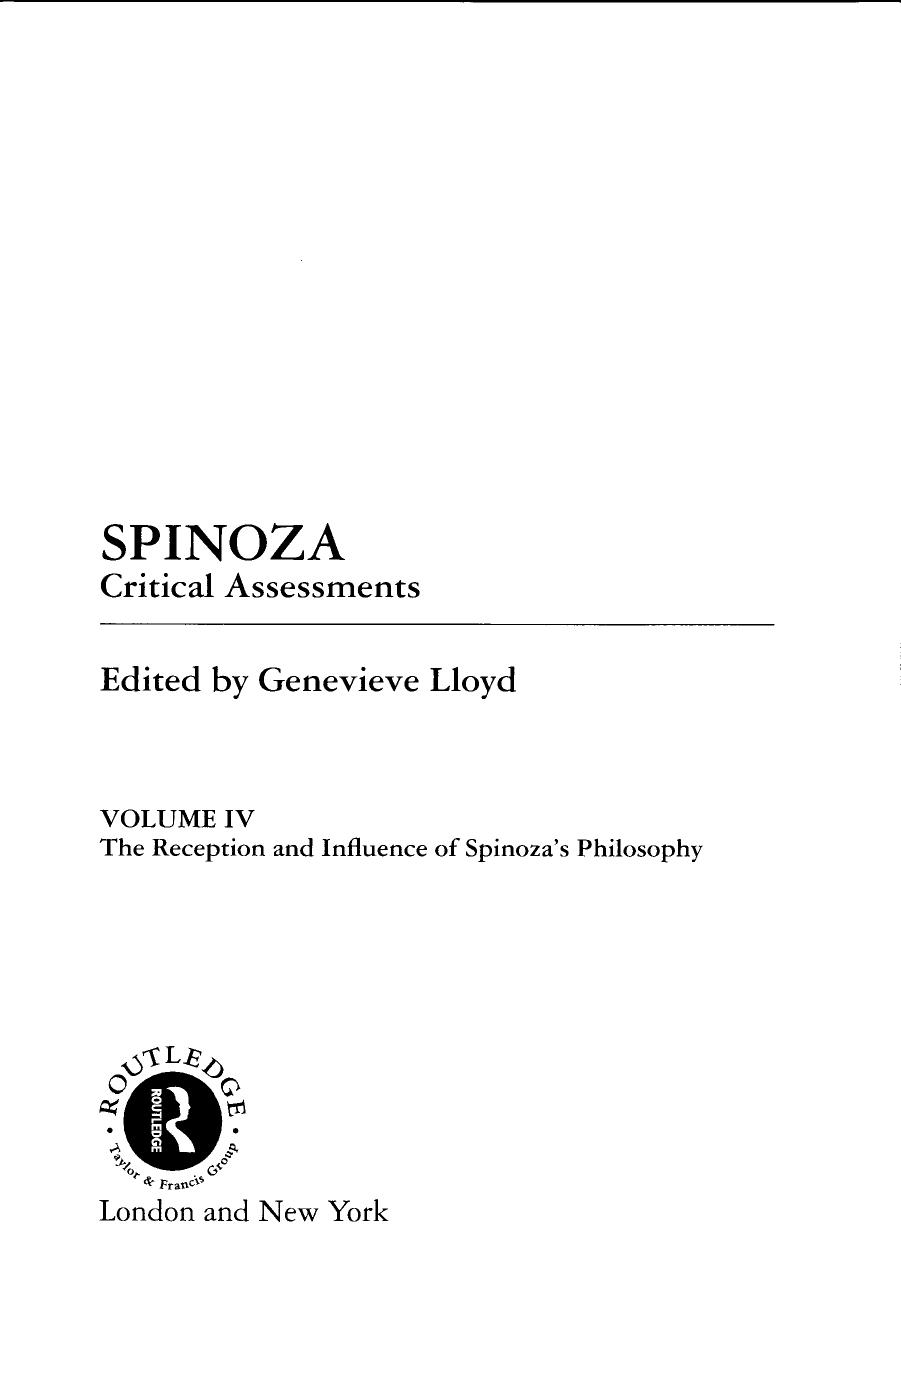 Spinoza: The Reception and Influence of Spinoza's Philosophy